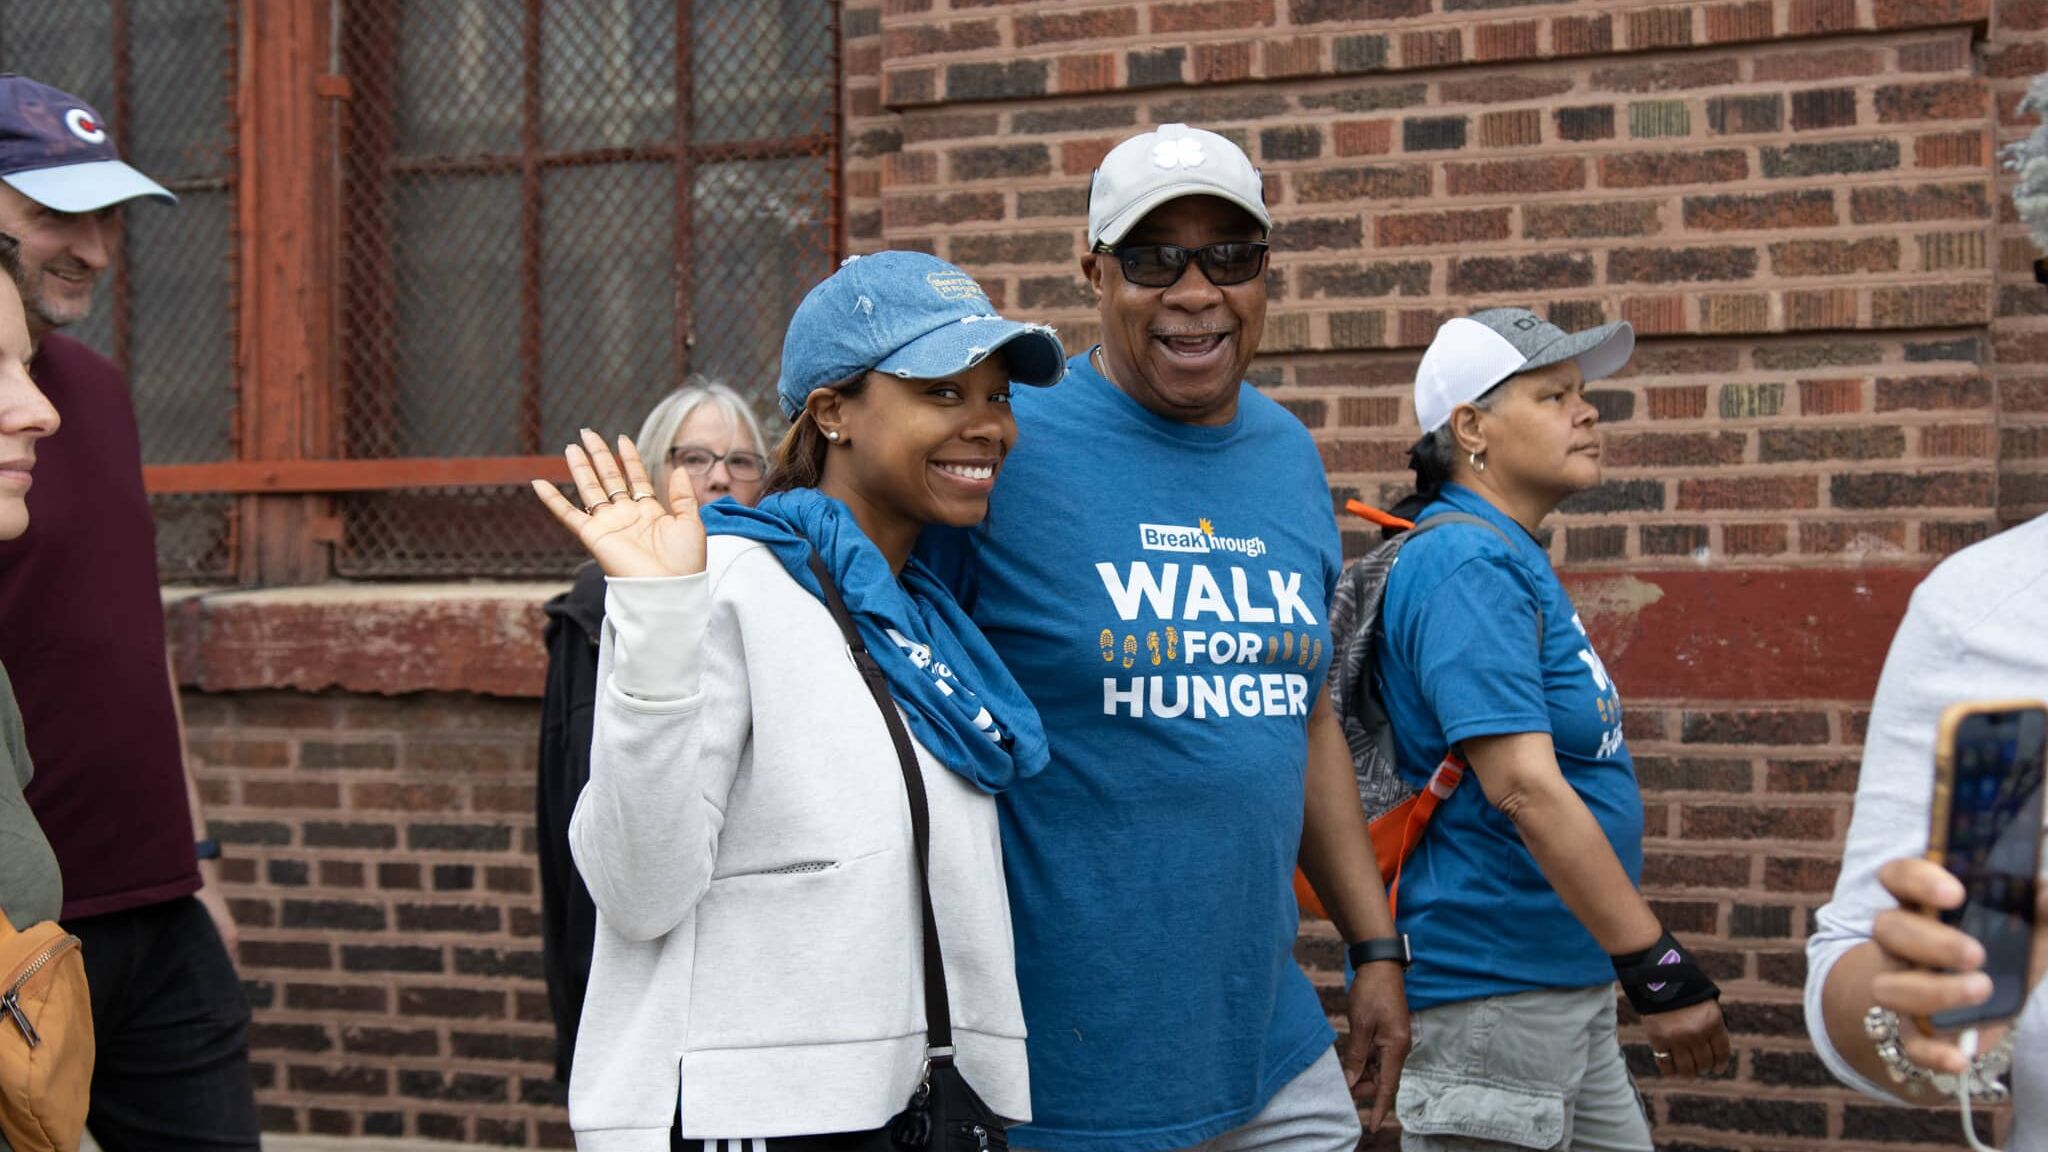 More Than 600 People Participate in Walk for Hunger 7